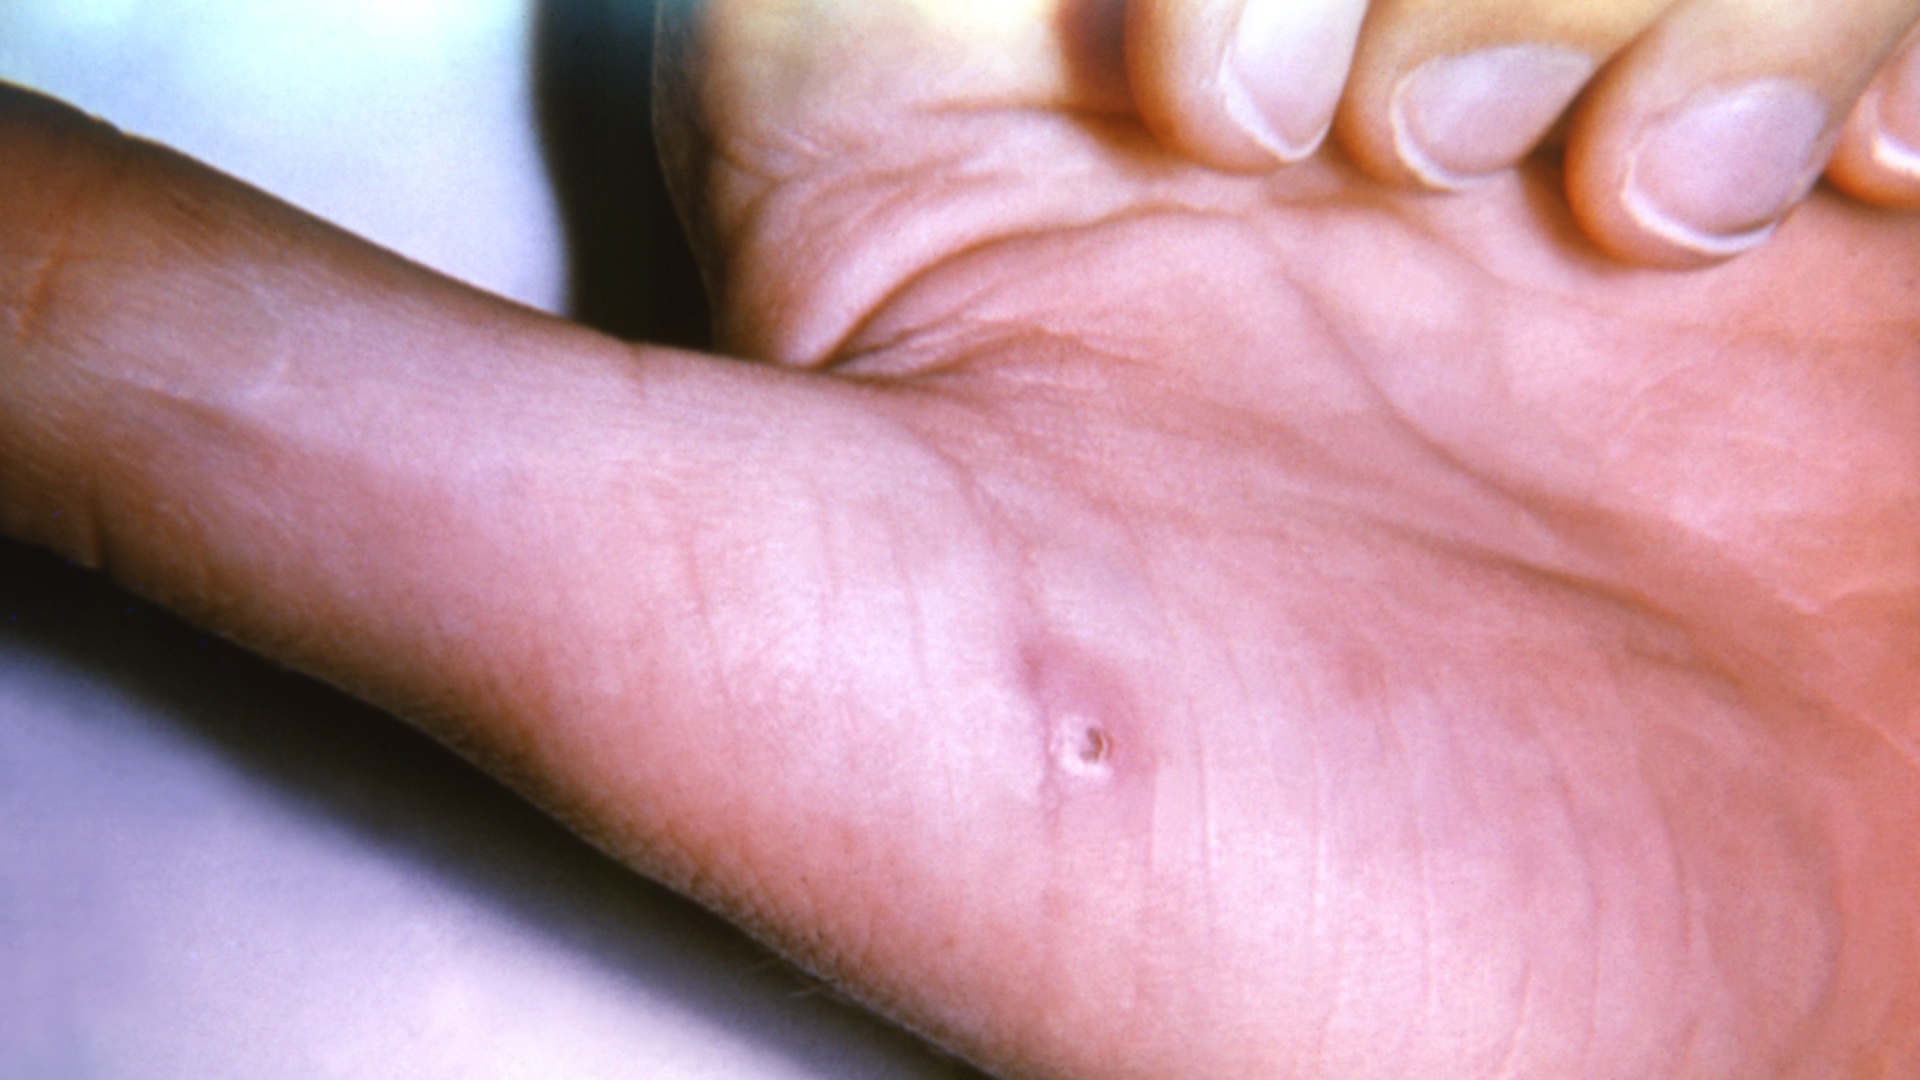 A photograph of a patient's hand with a lesion caused by a cat scratch